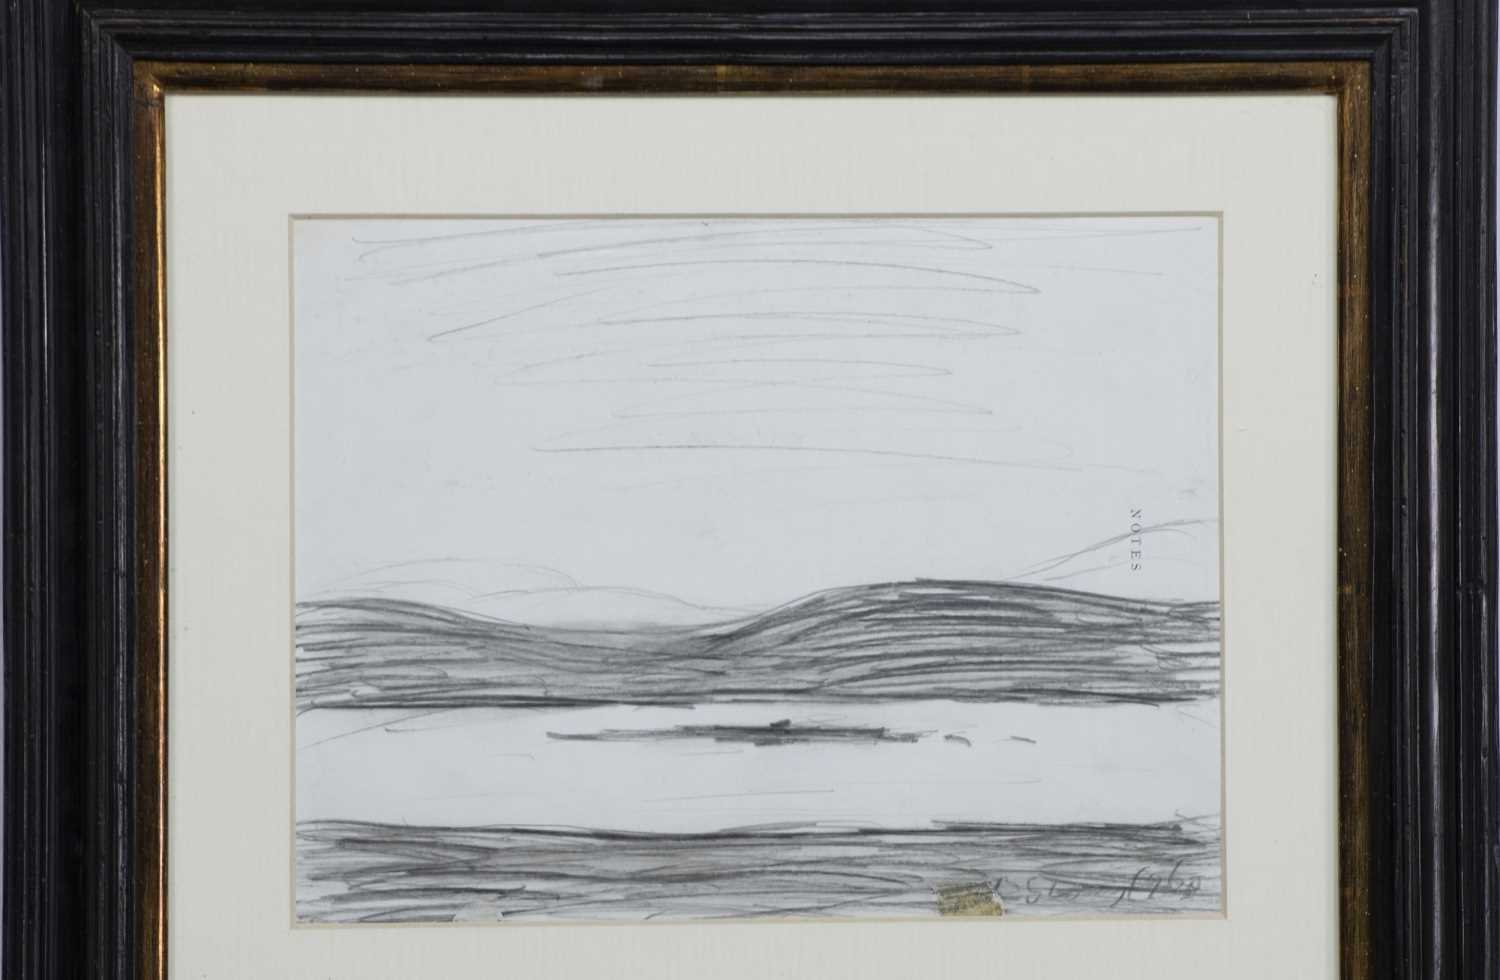 MOOD OF THE NORTH, A PENCIL DRAWING BY L S LOWRY - Image 2 of 4